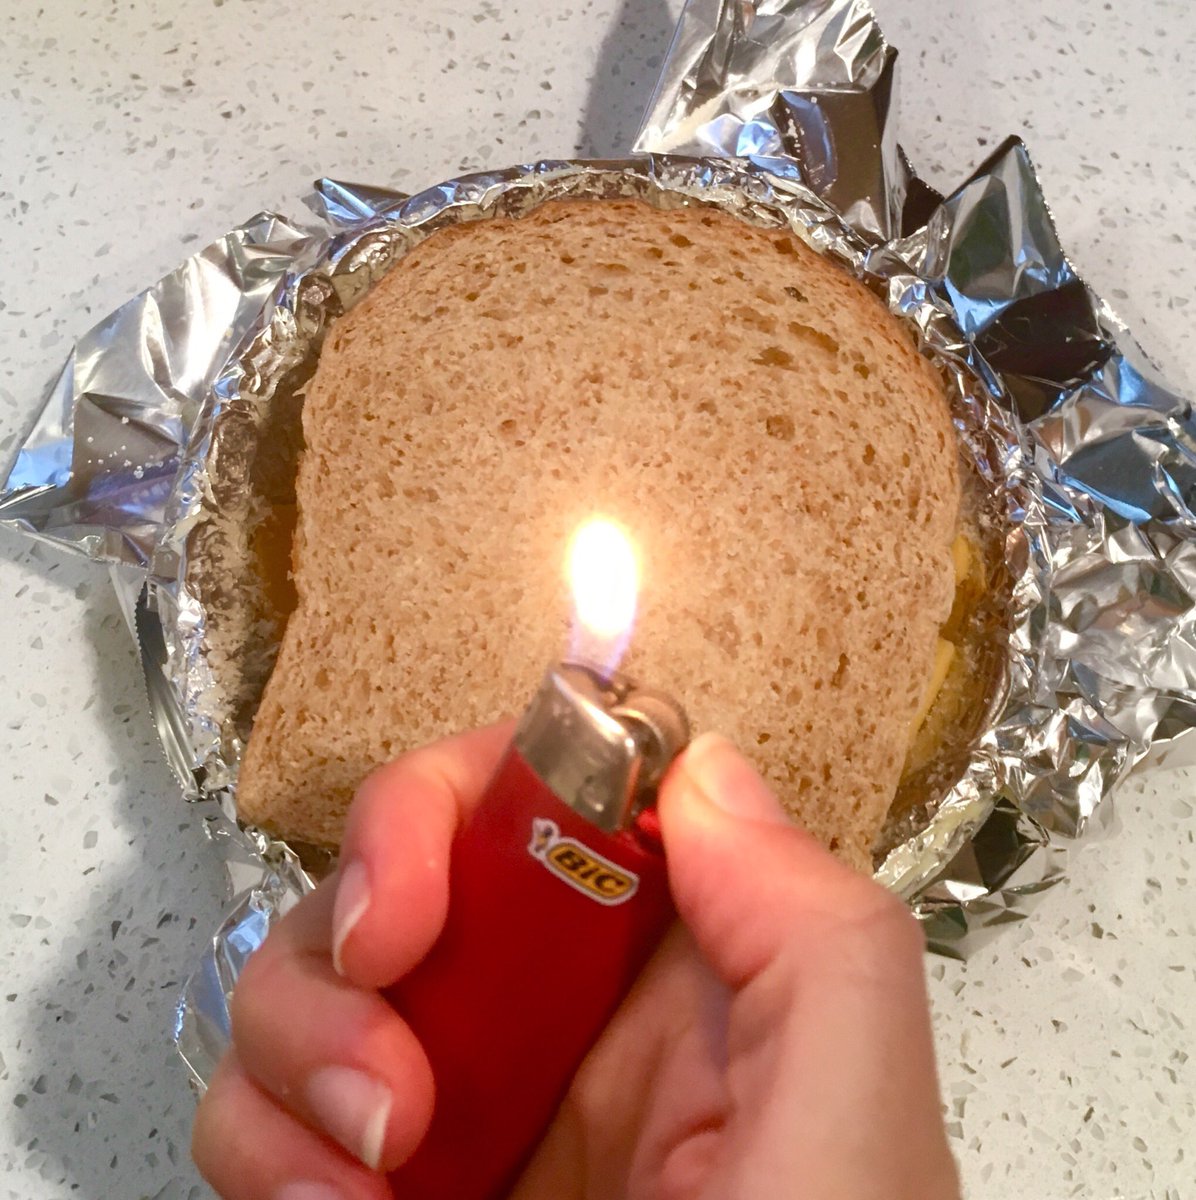 8) oh yeah the most important step! Grab a lighter and brand that shit with PC for Piccolini Cuscino. Little Pillow. RPat used a hamburger bun but I only have bread so. It is what it is.9) question all the life decisions that brought you to this point